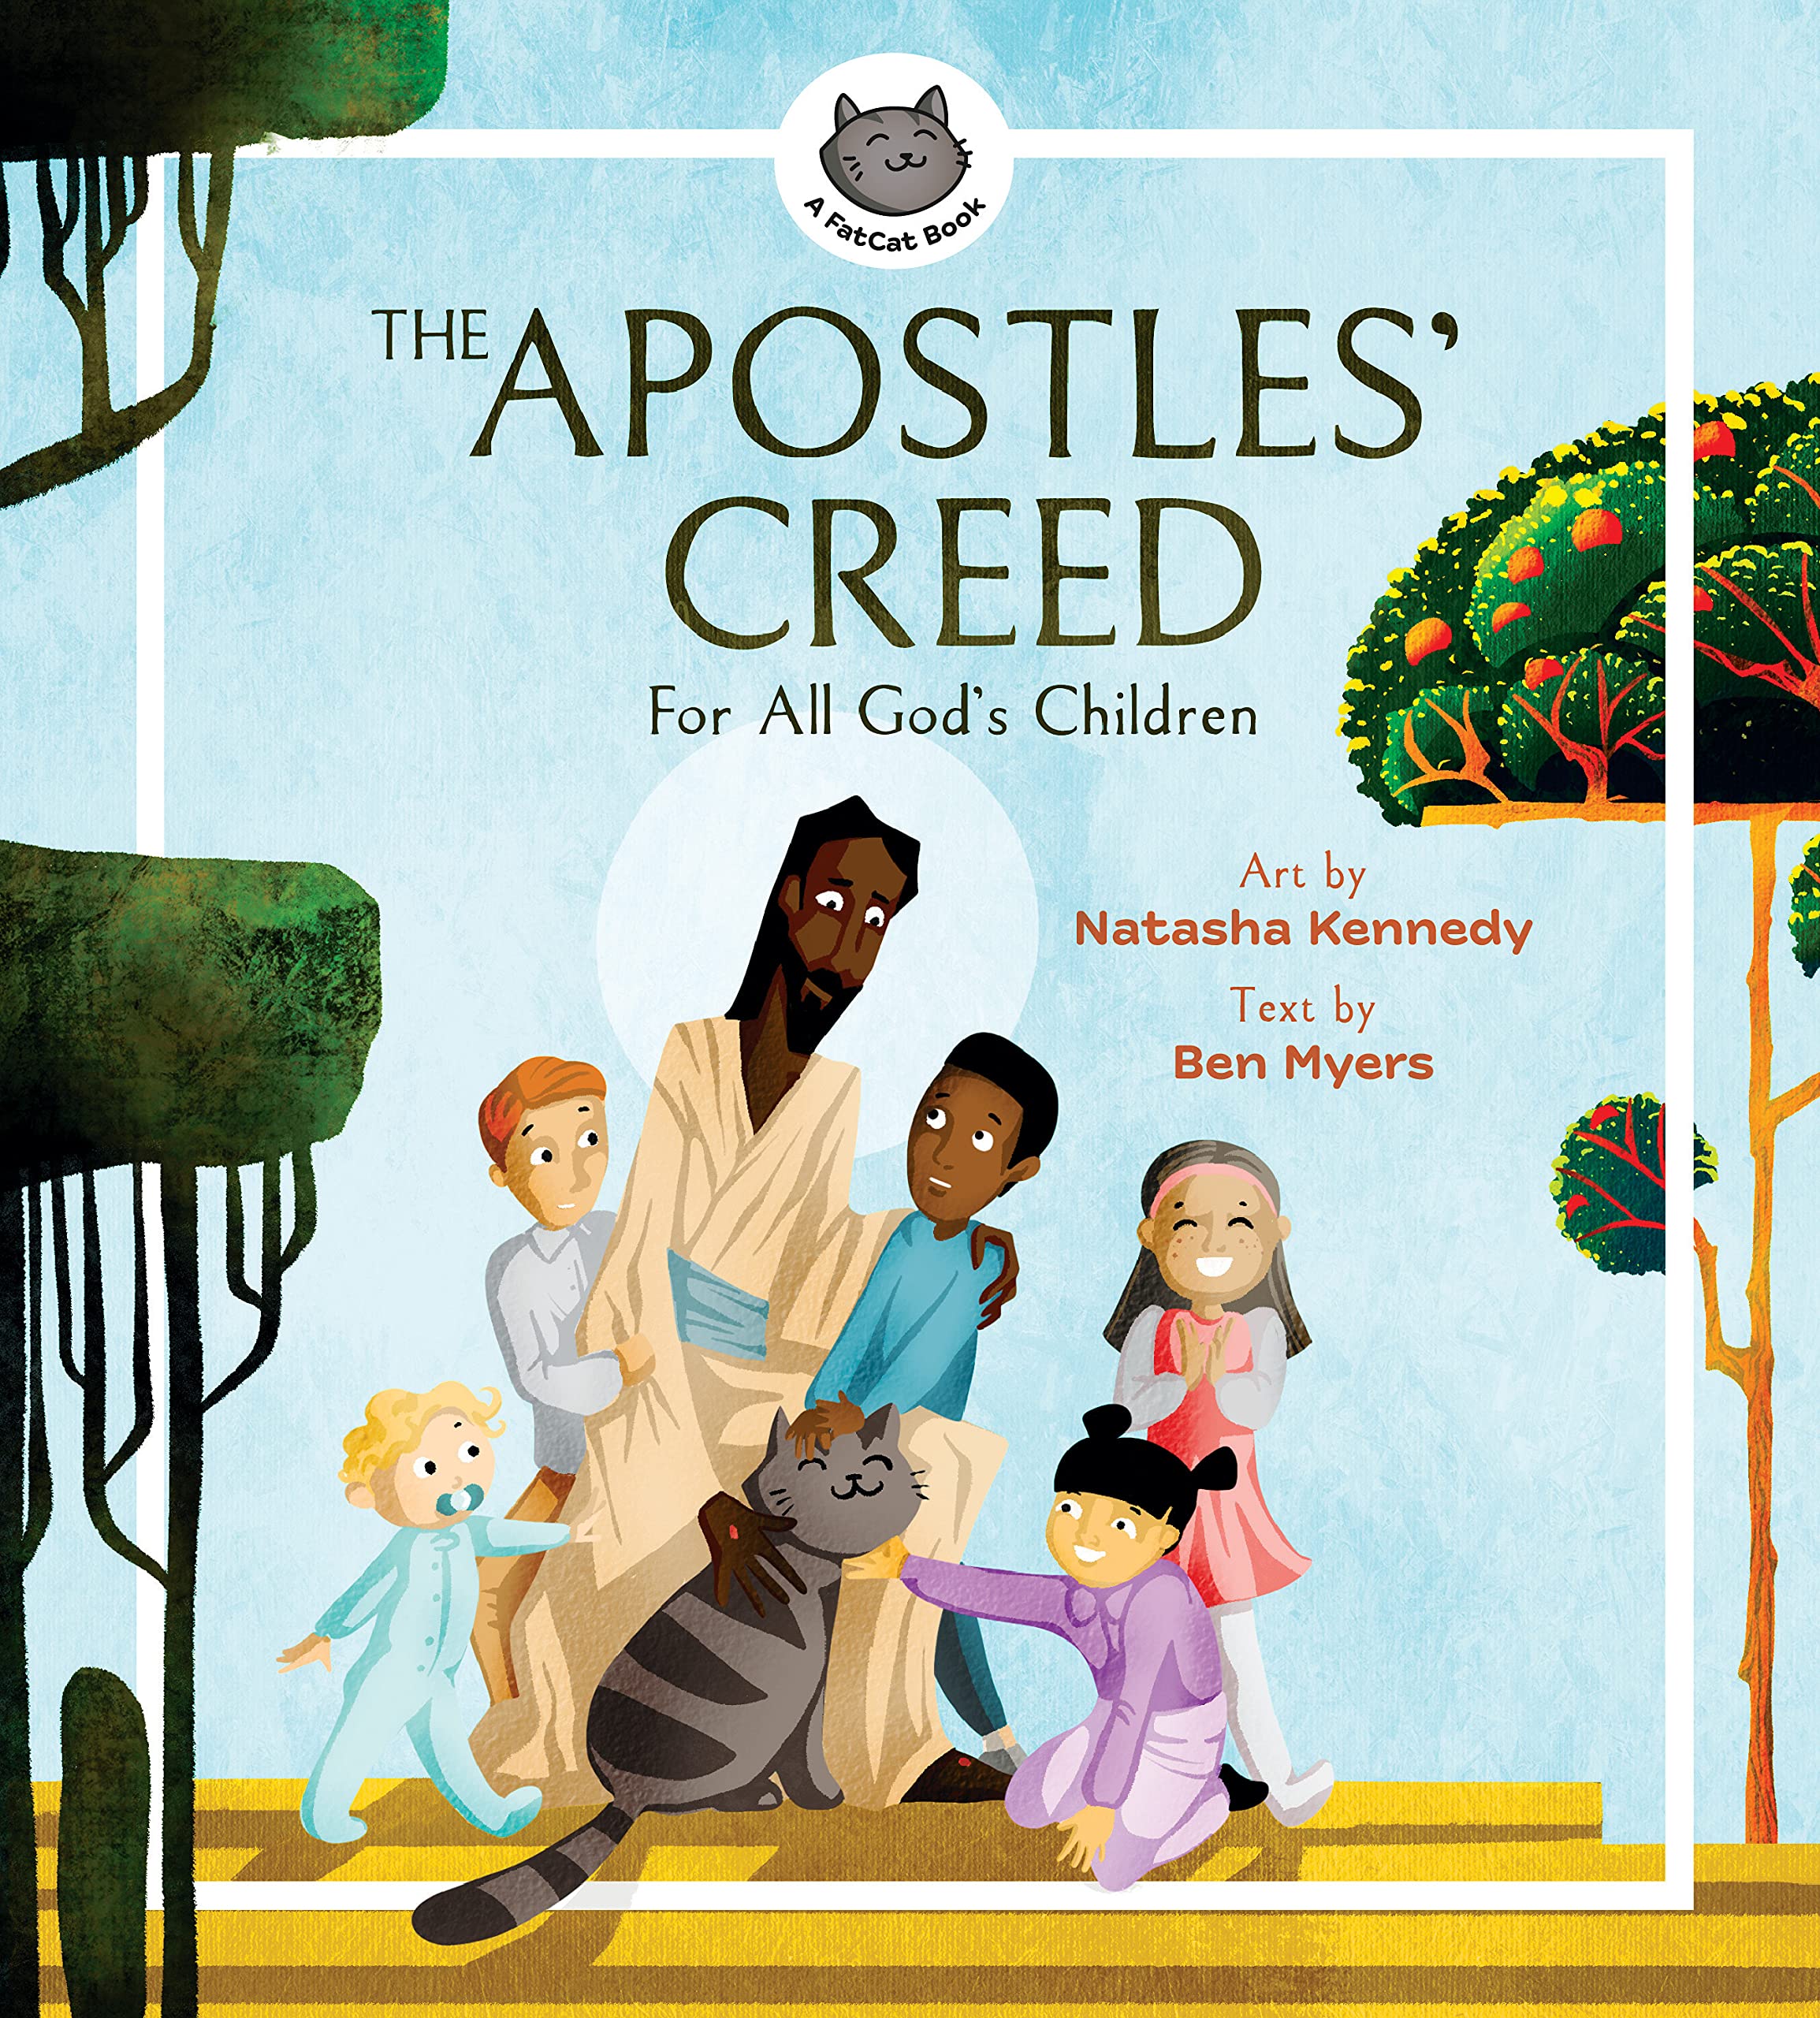 The Apostles' Creed: For All God's Children (A Fatcat Book)